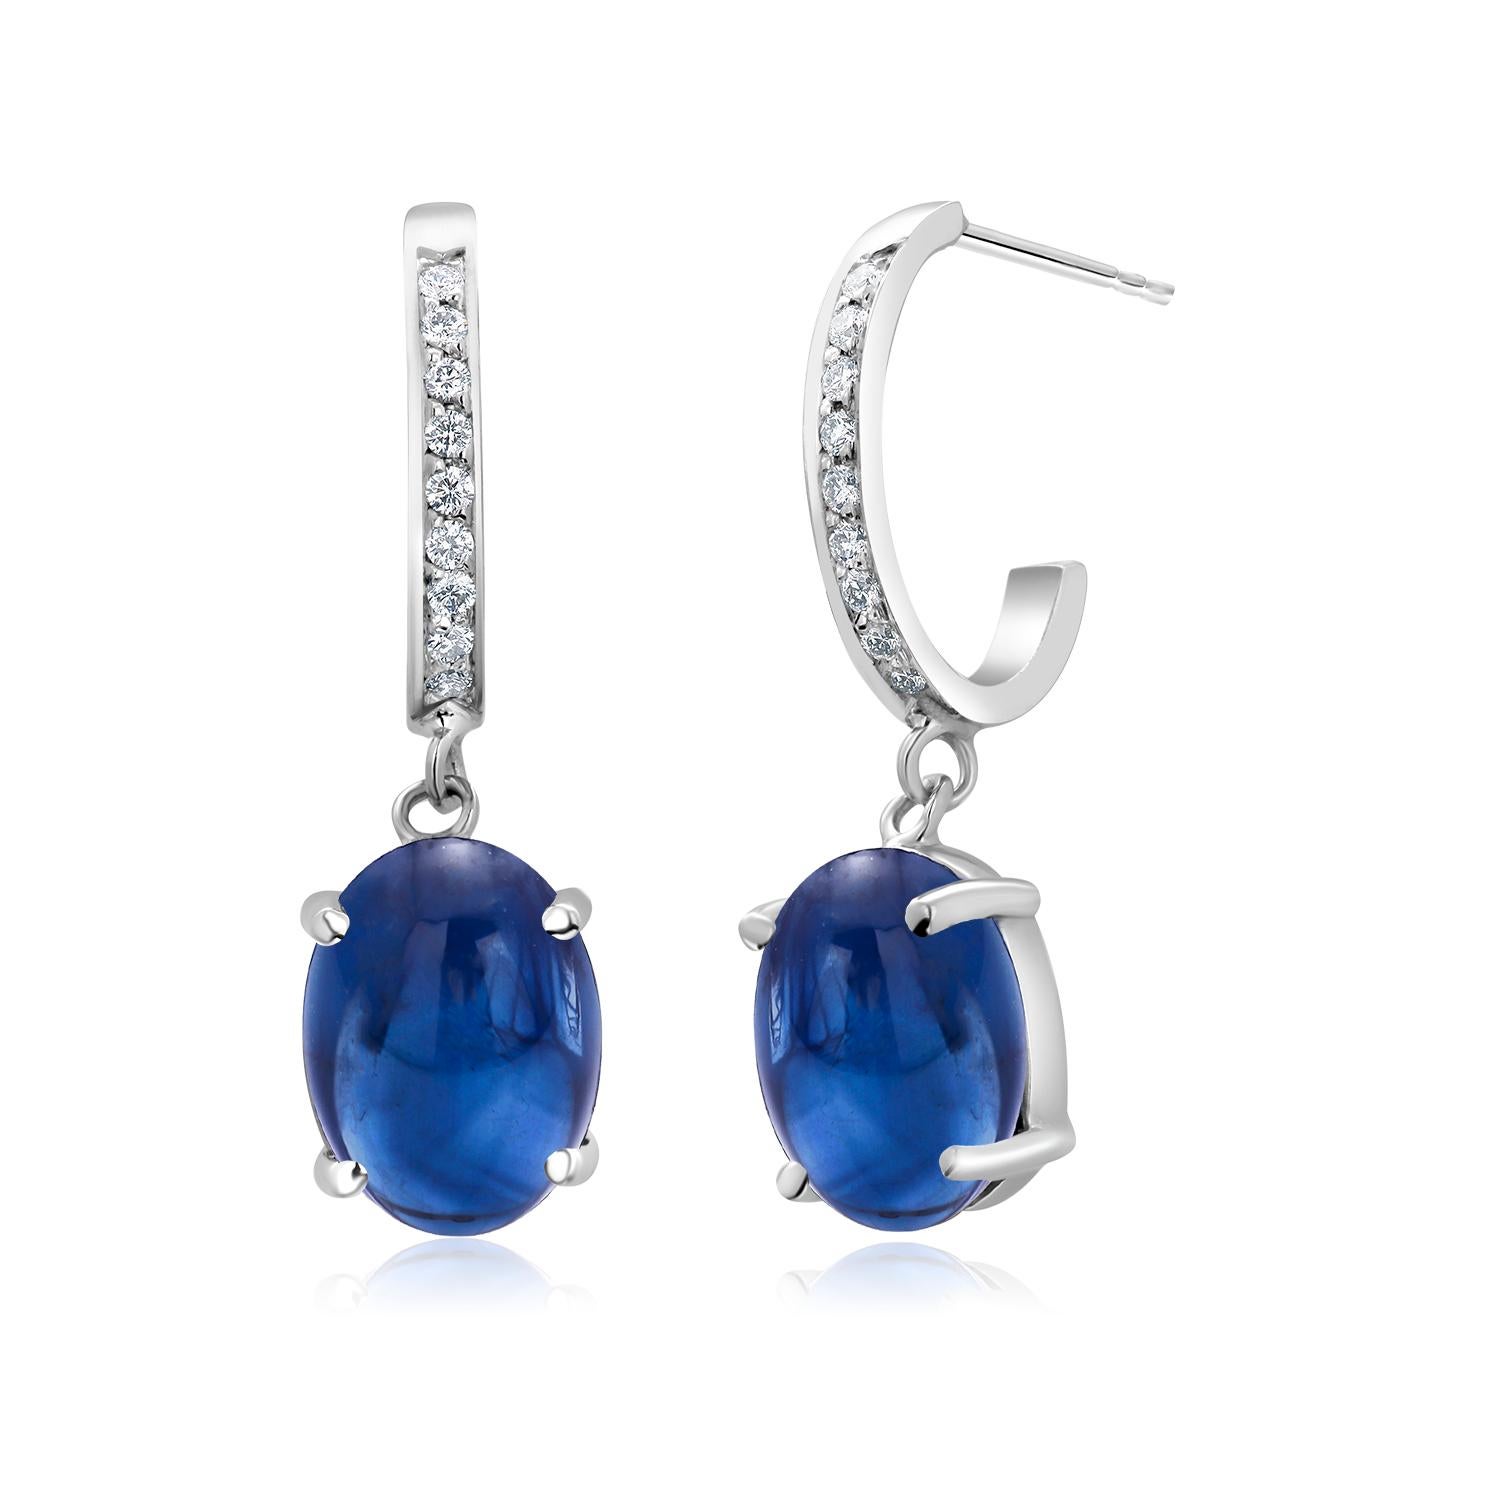 Contemporary Cabochon Sapphire and Diamond Gold Hoop Earrings Weighing 6.23 Carats